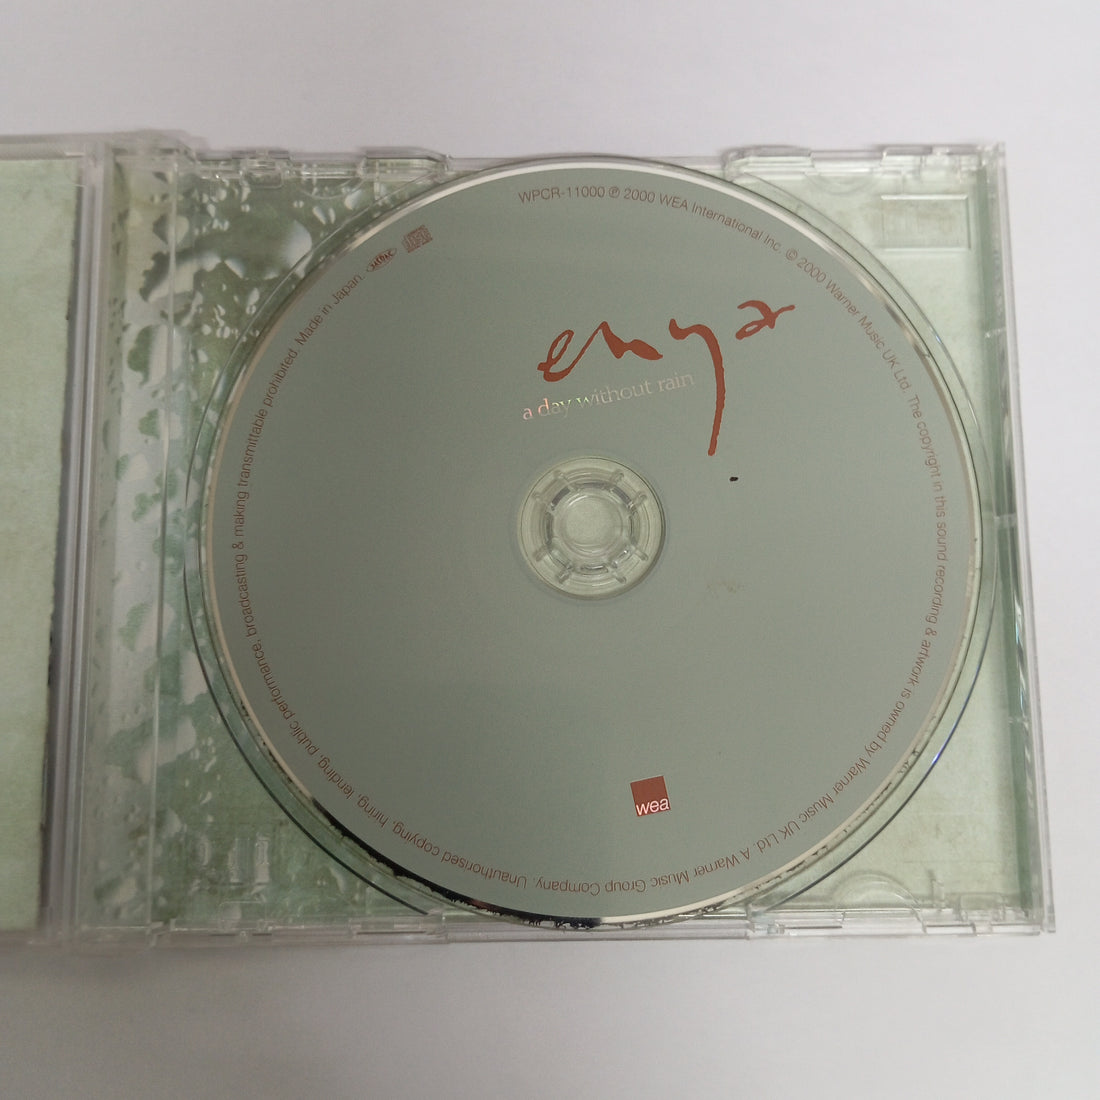 Enya - A Day Without Rain (CD) (VG)